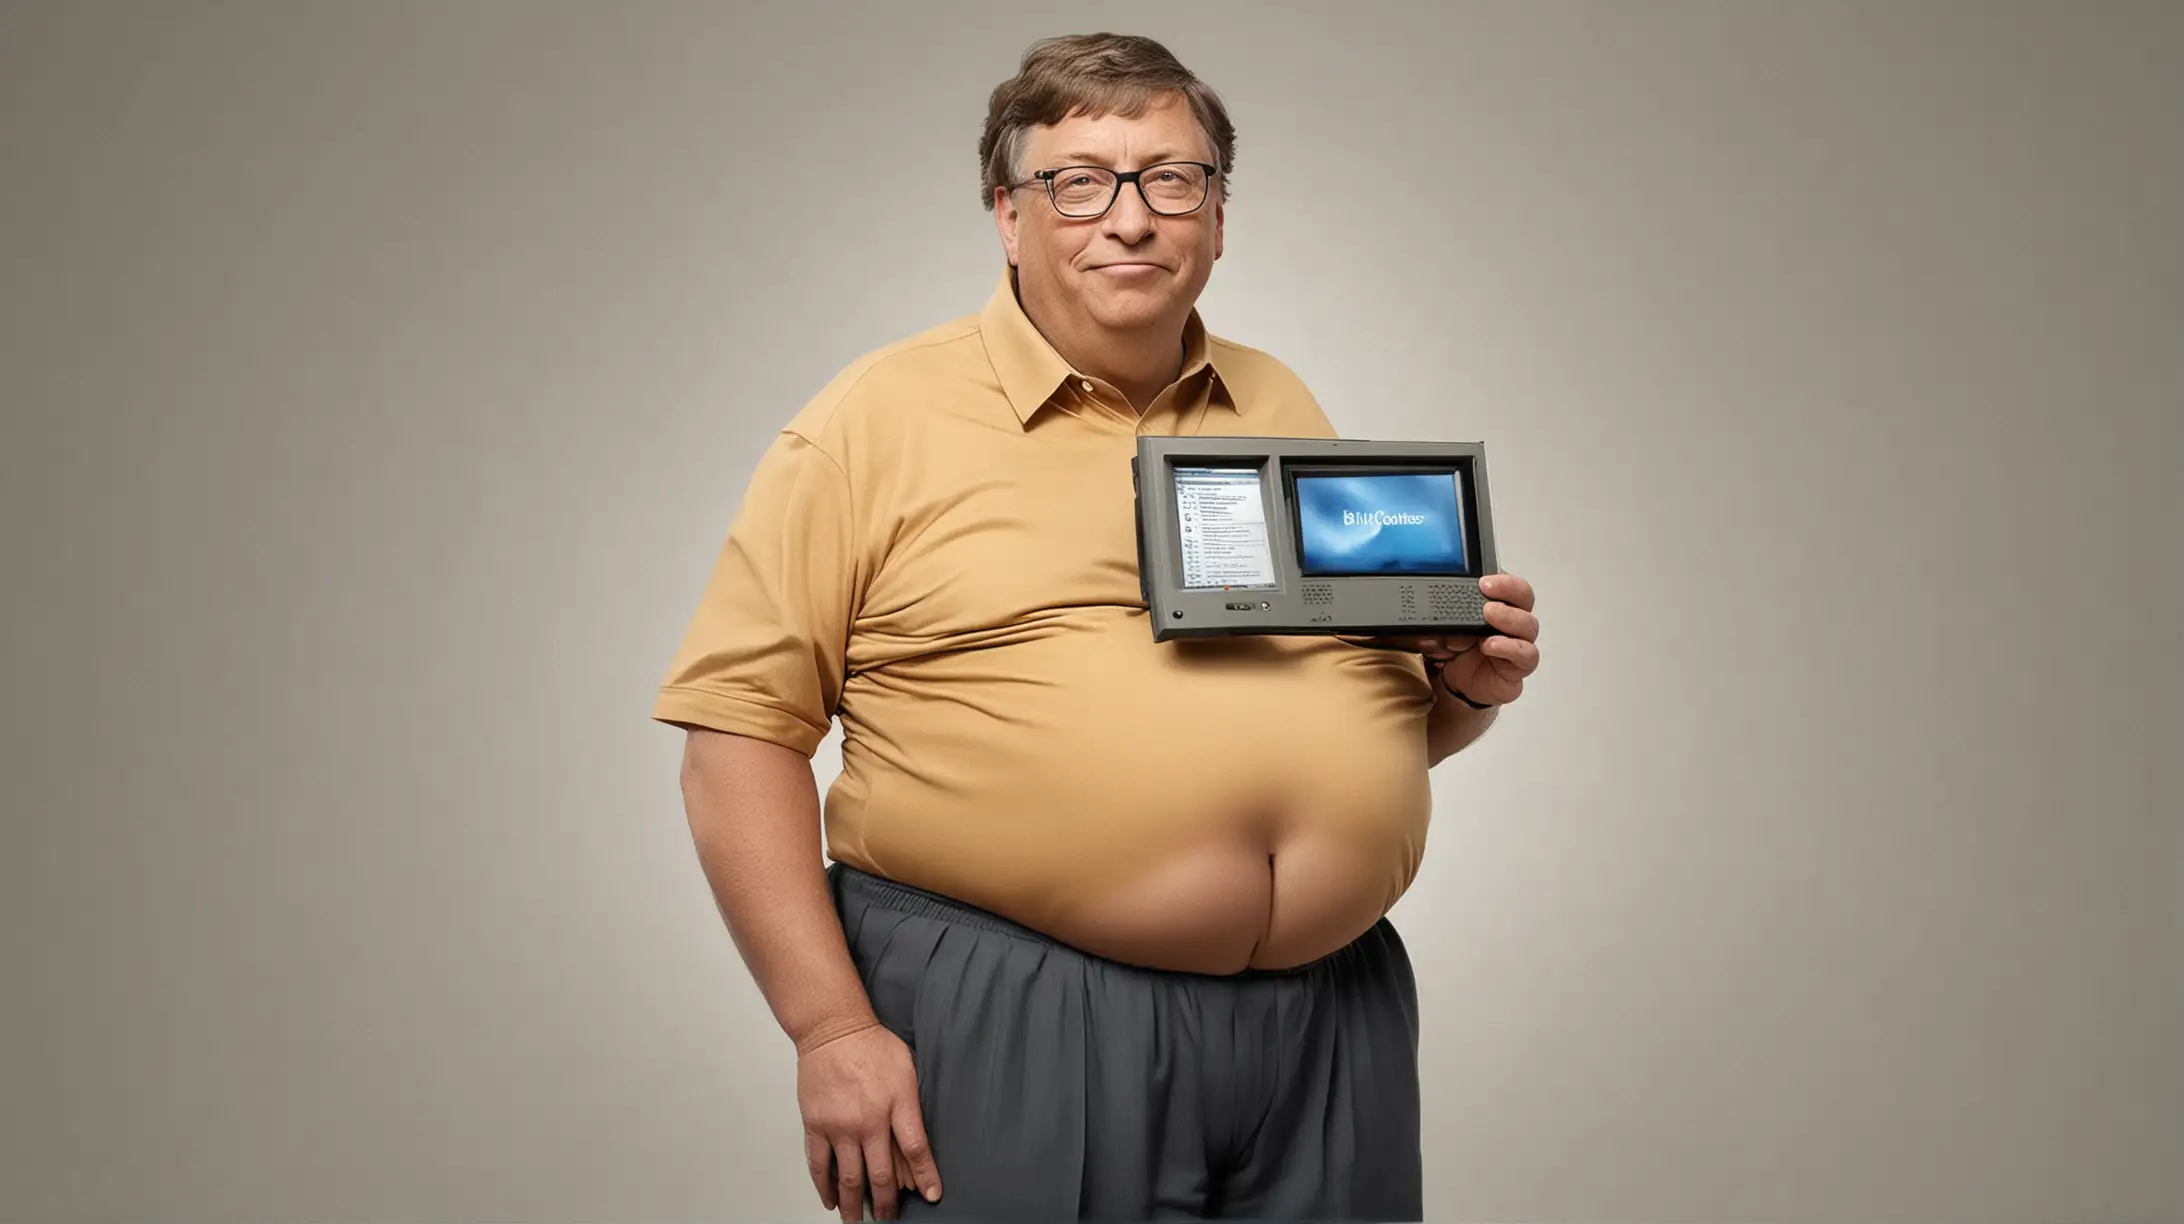 What if Bill Gates were grossly obese? Would Windows be the answer?